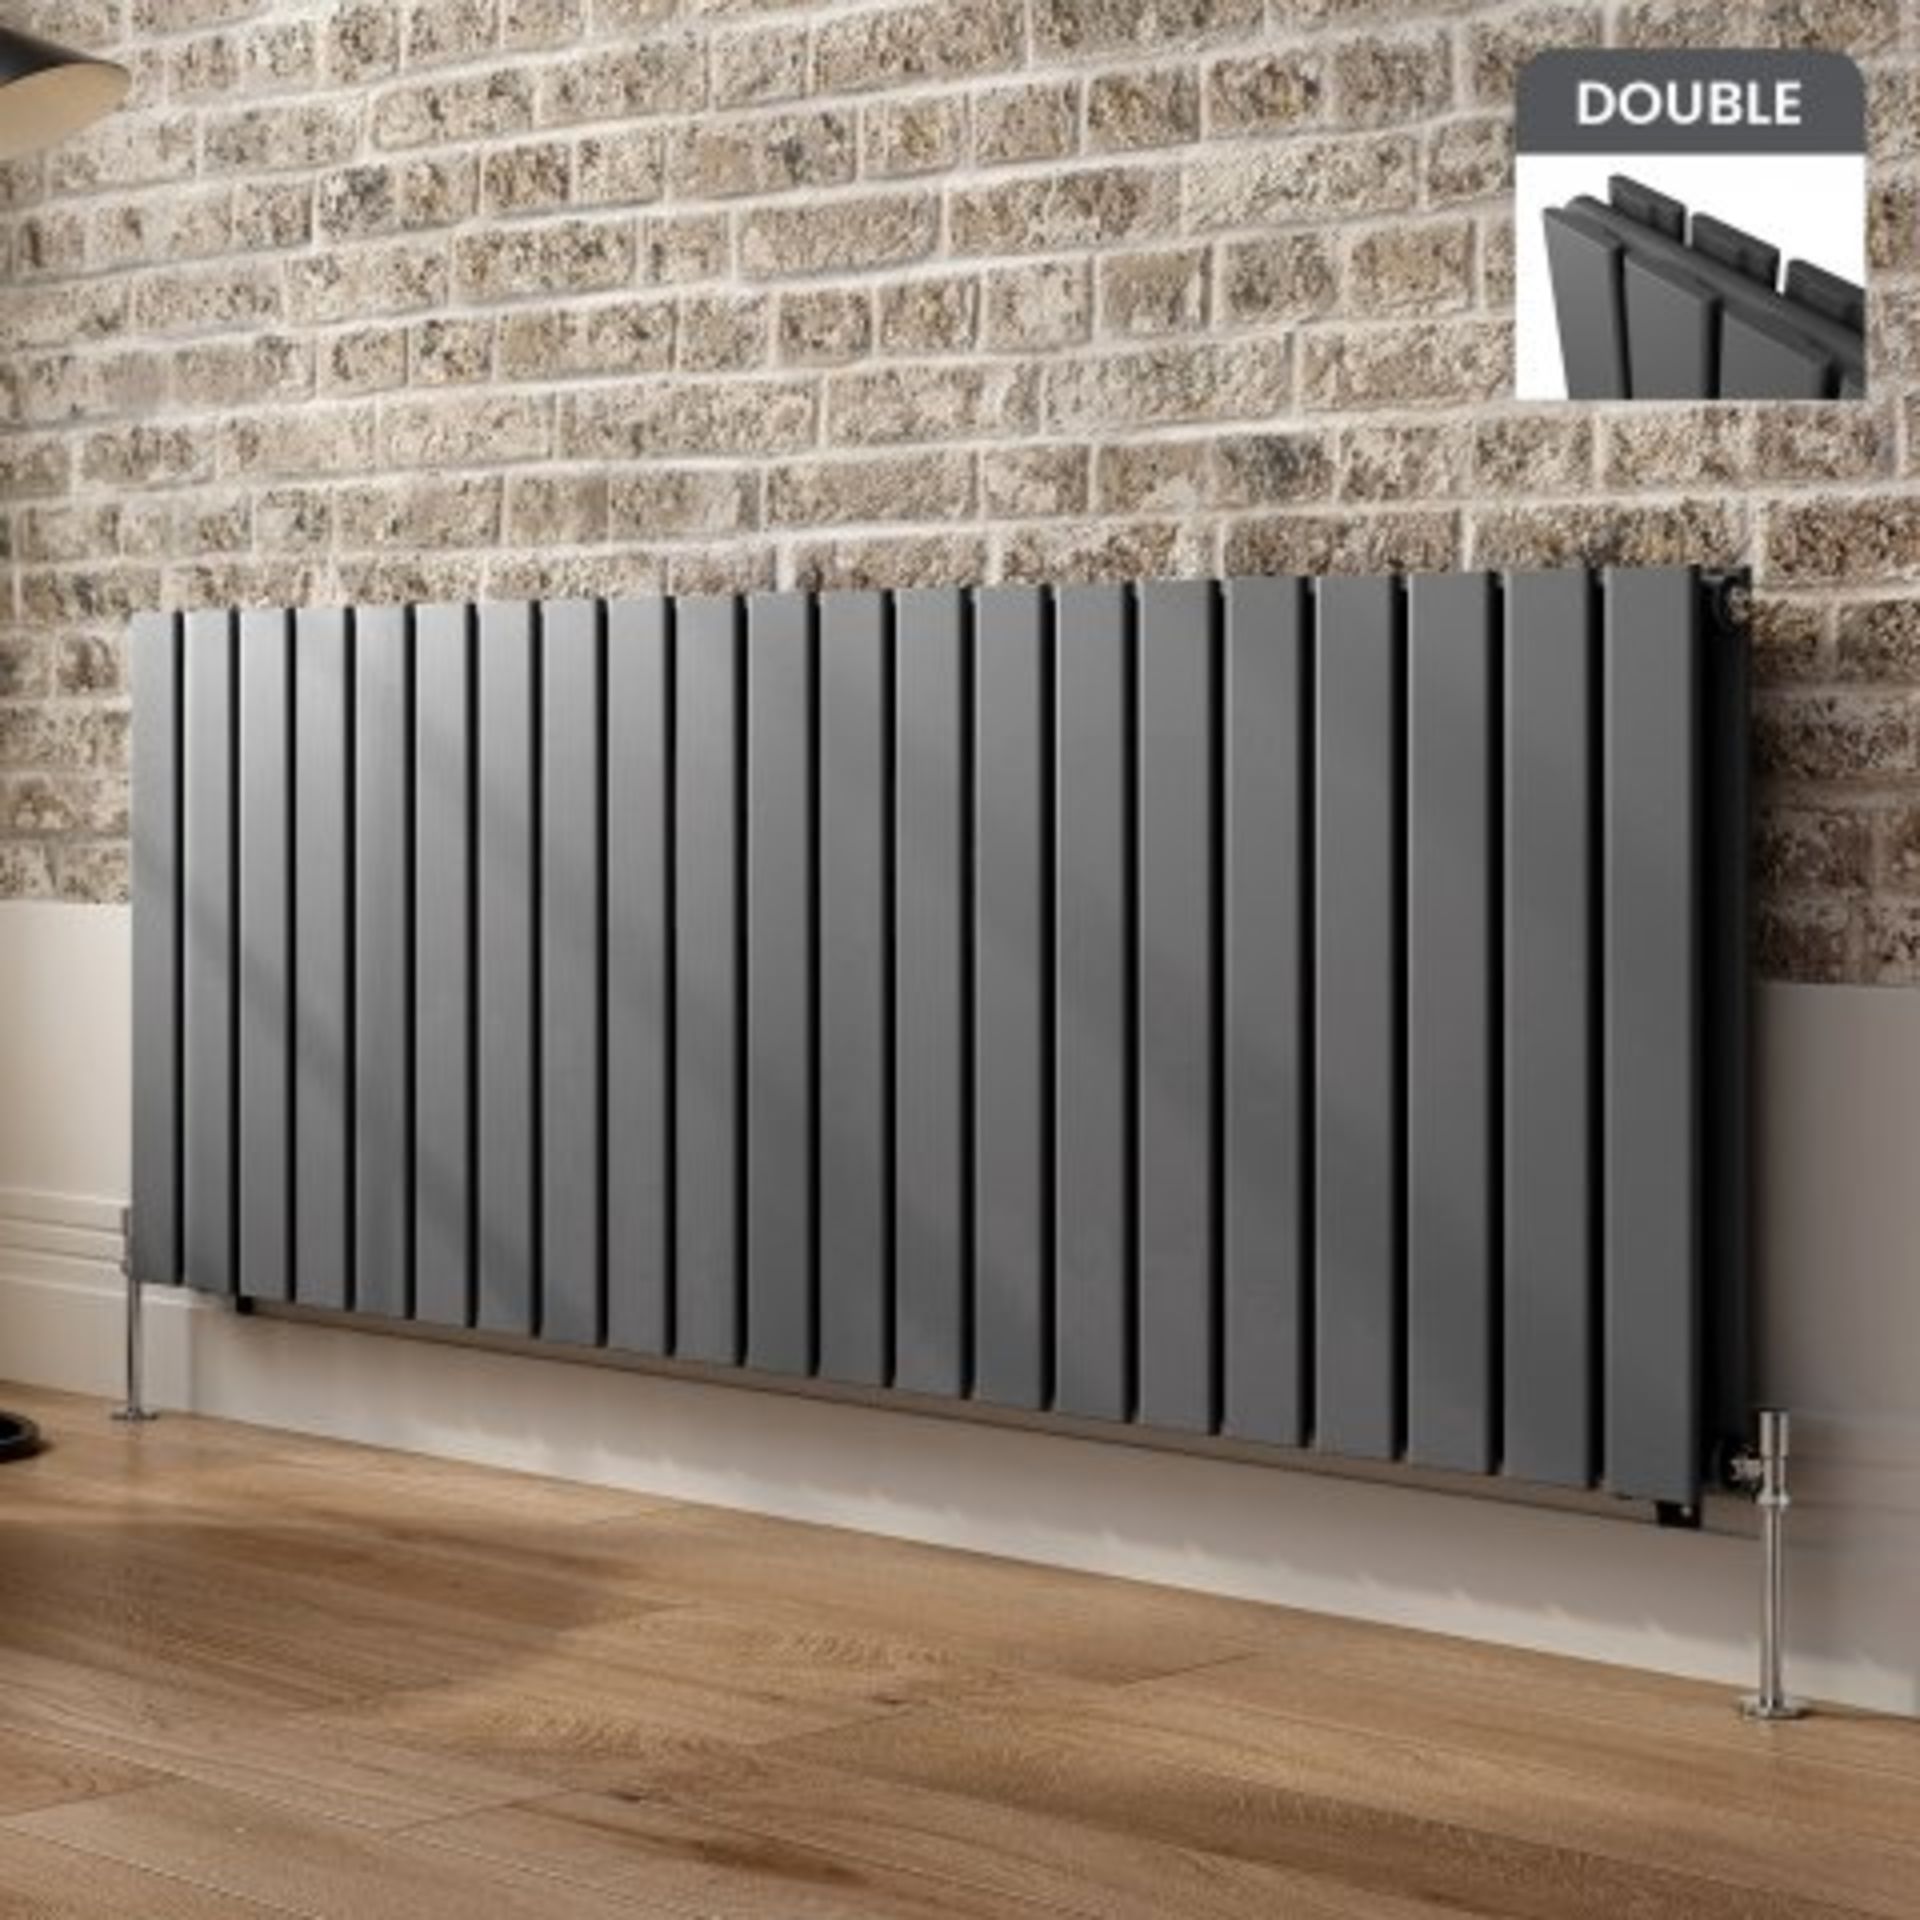 (I10) 600x1596mm Anthracite Double Flat Panel Horizontal Radiator RRP £674.99 Designer Touch Ultra-